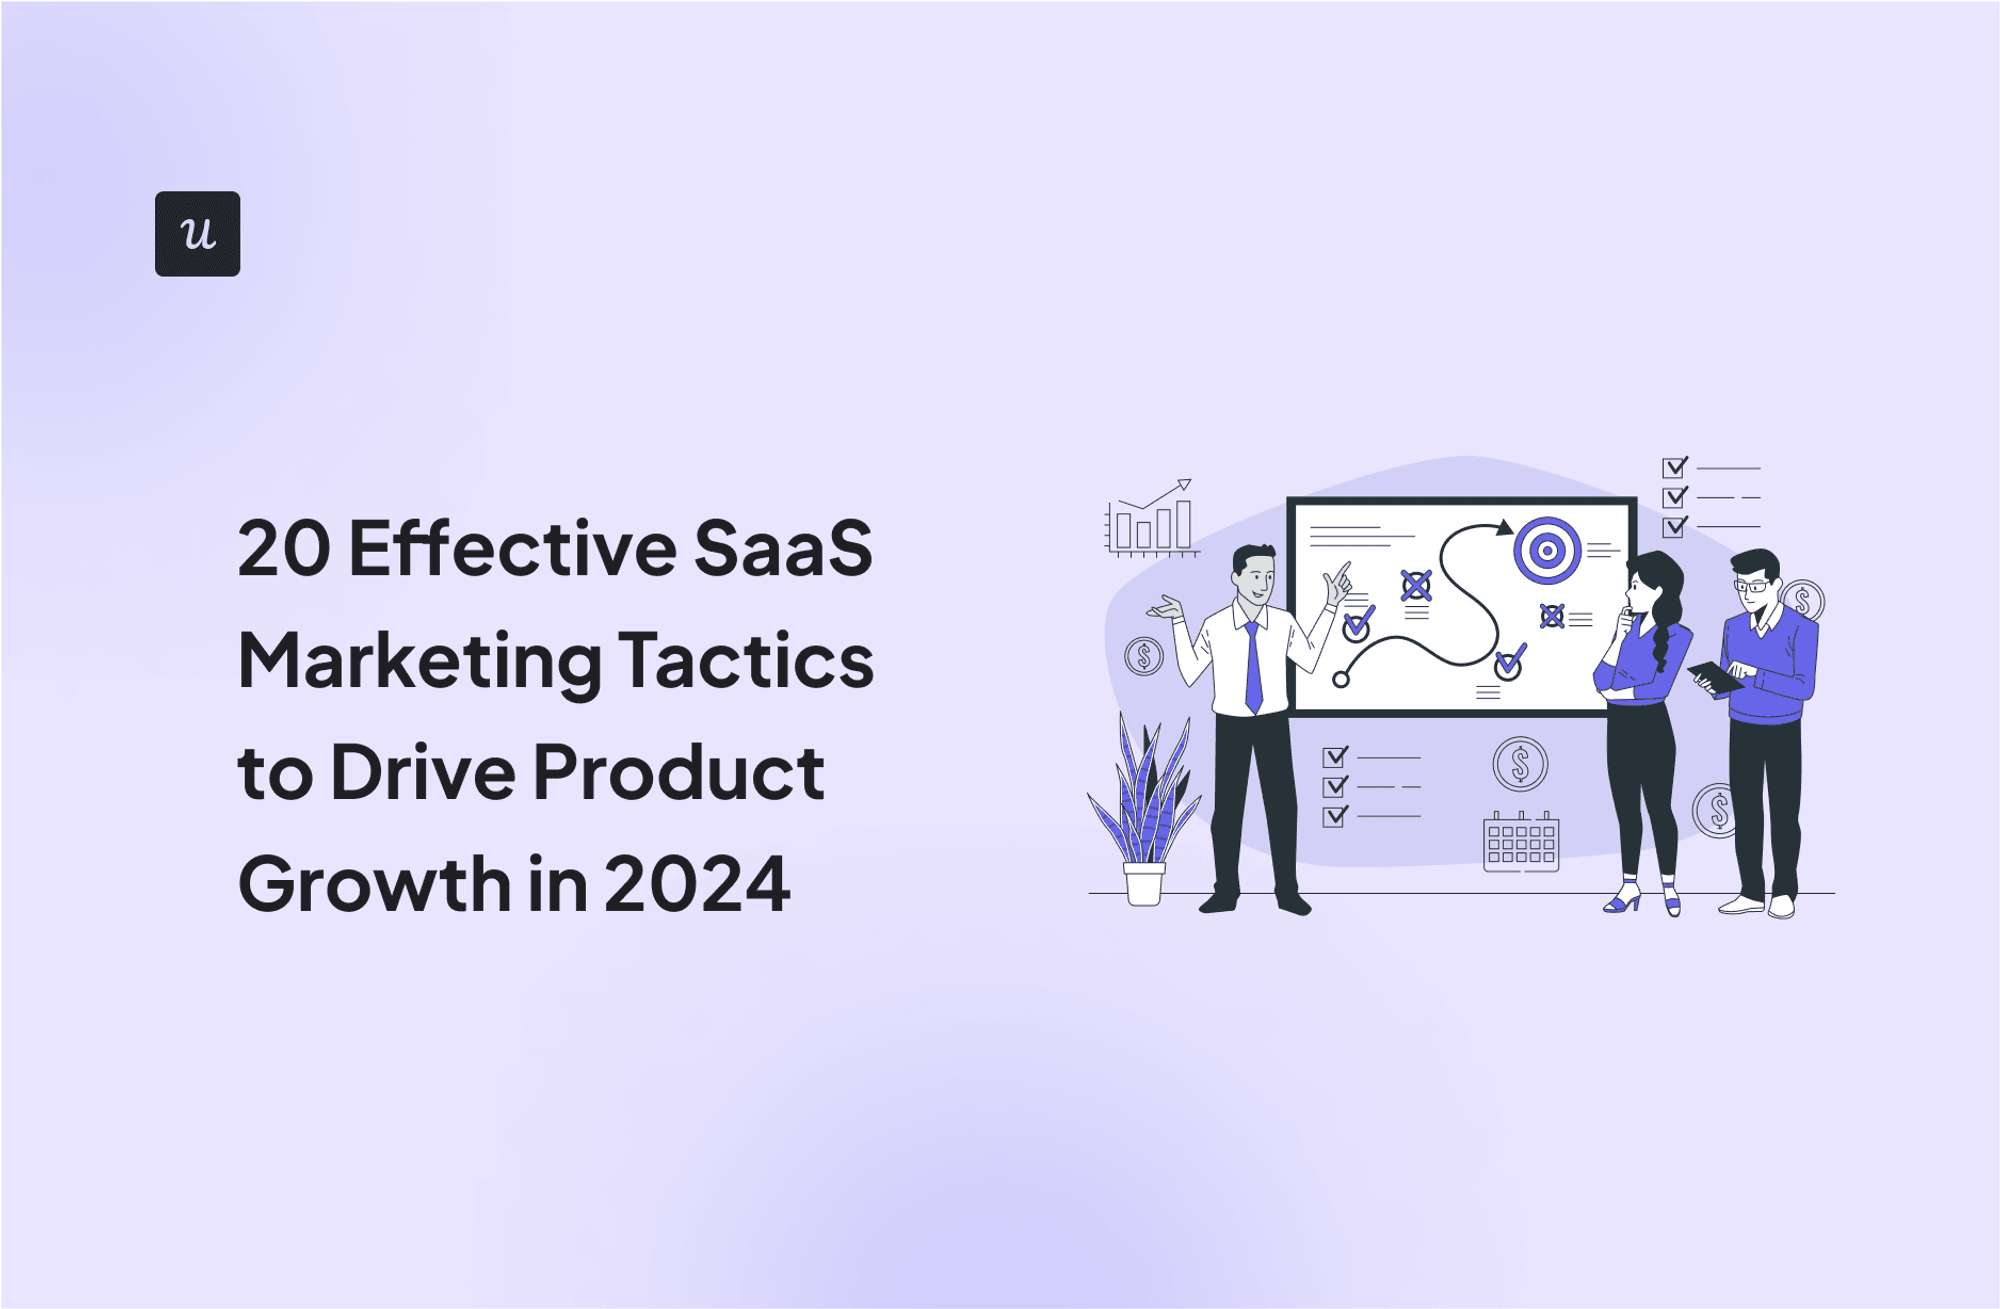 20 Effective SaaS Marketing Tactics to Drive Product Growth in 2024 cover